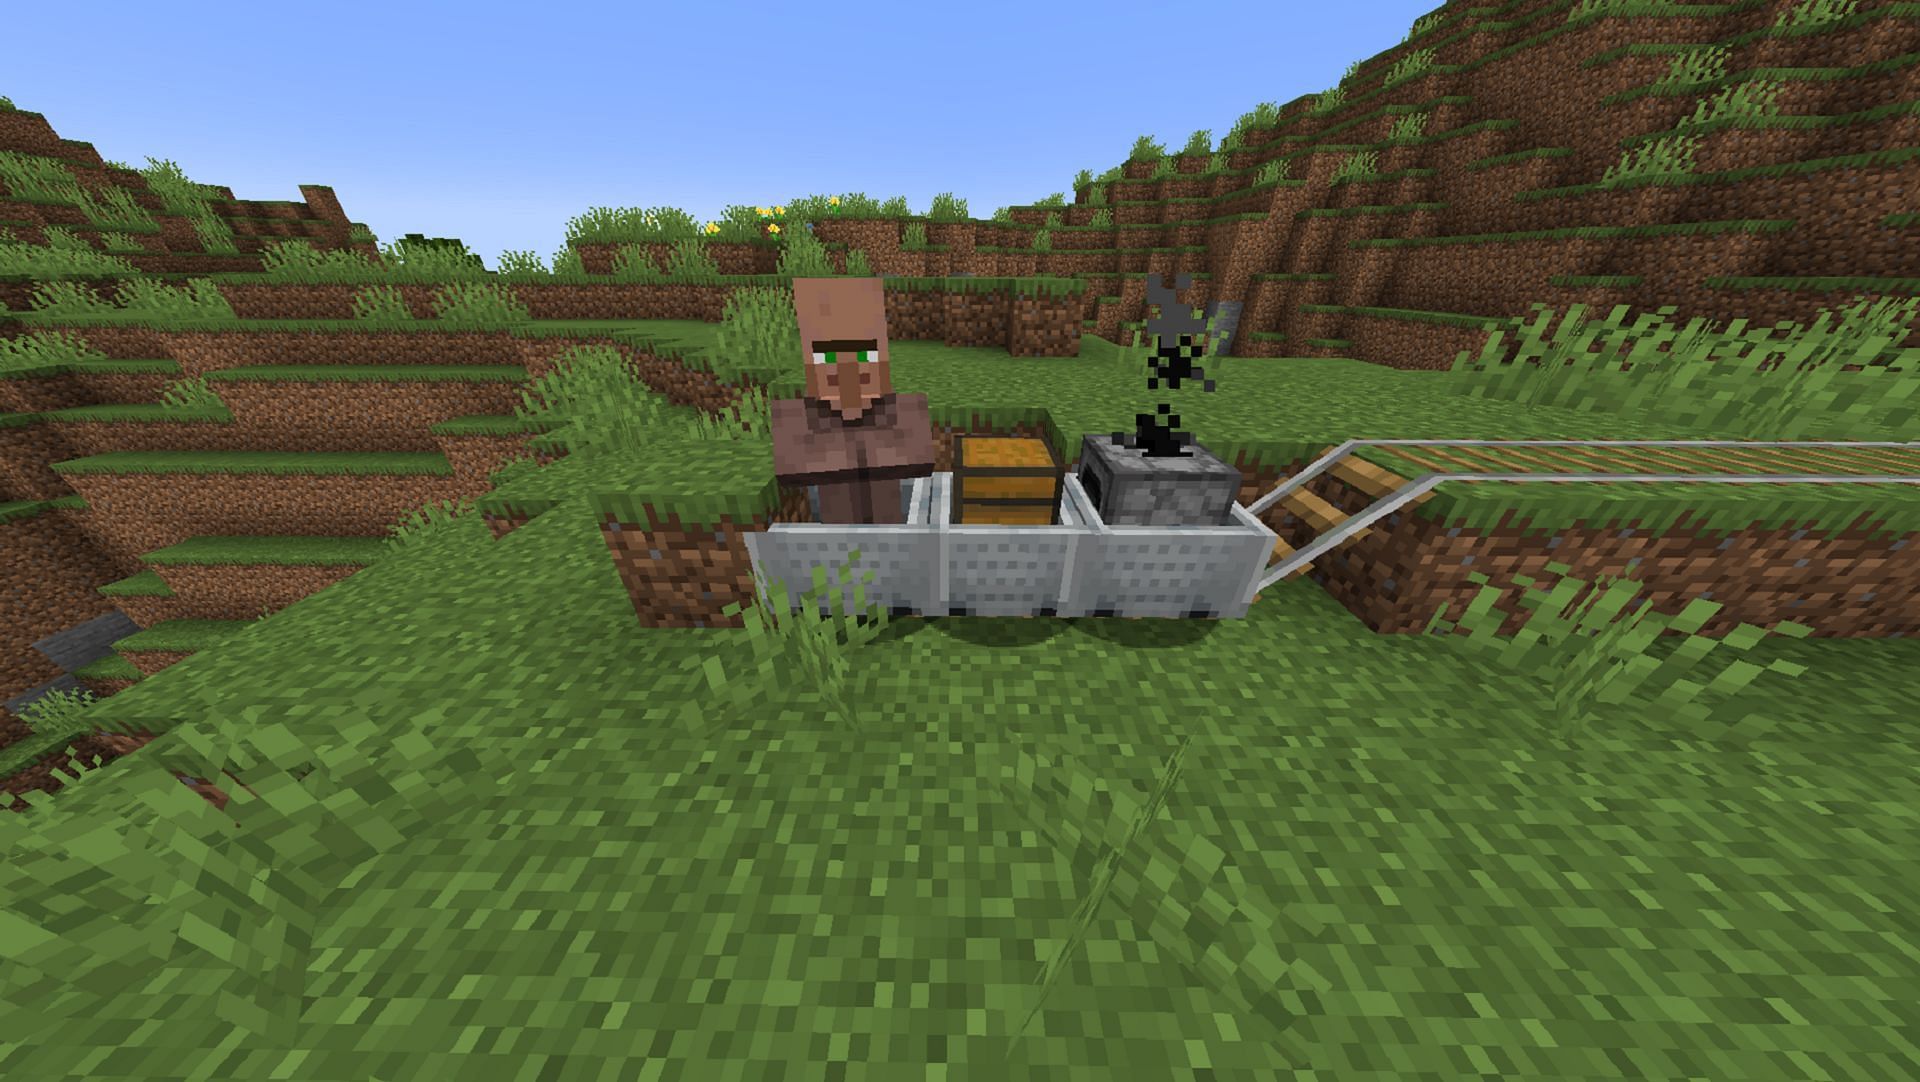 Furnace minecarts in Minecraft have effectively been obsoleted (Image via Mojang)